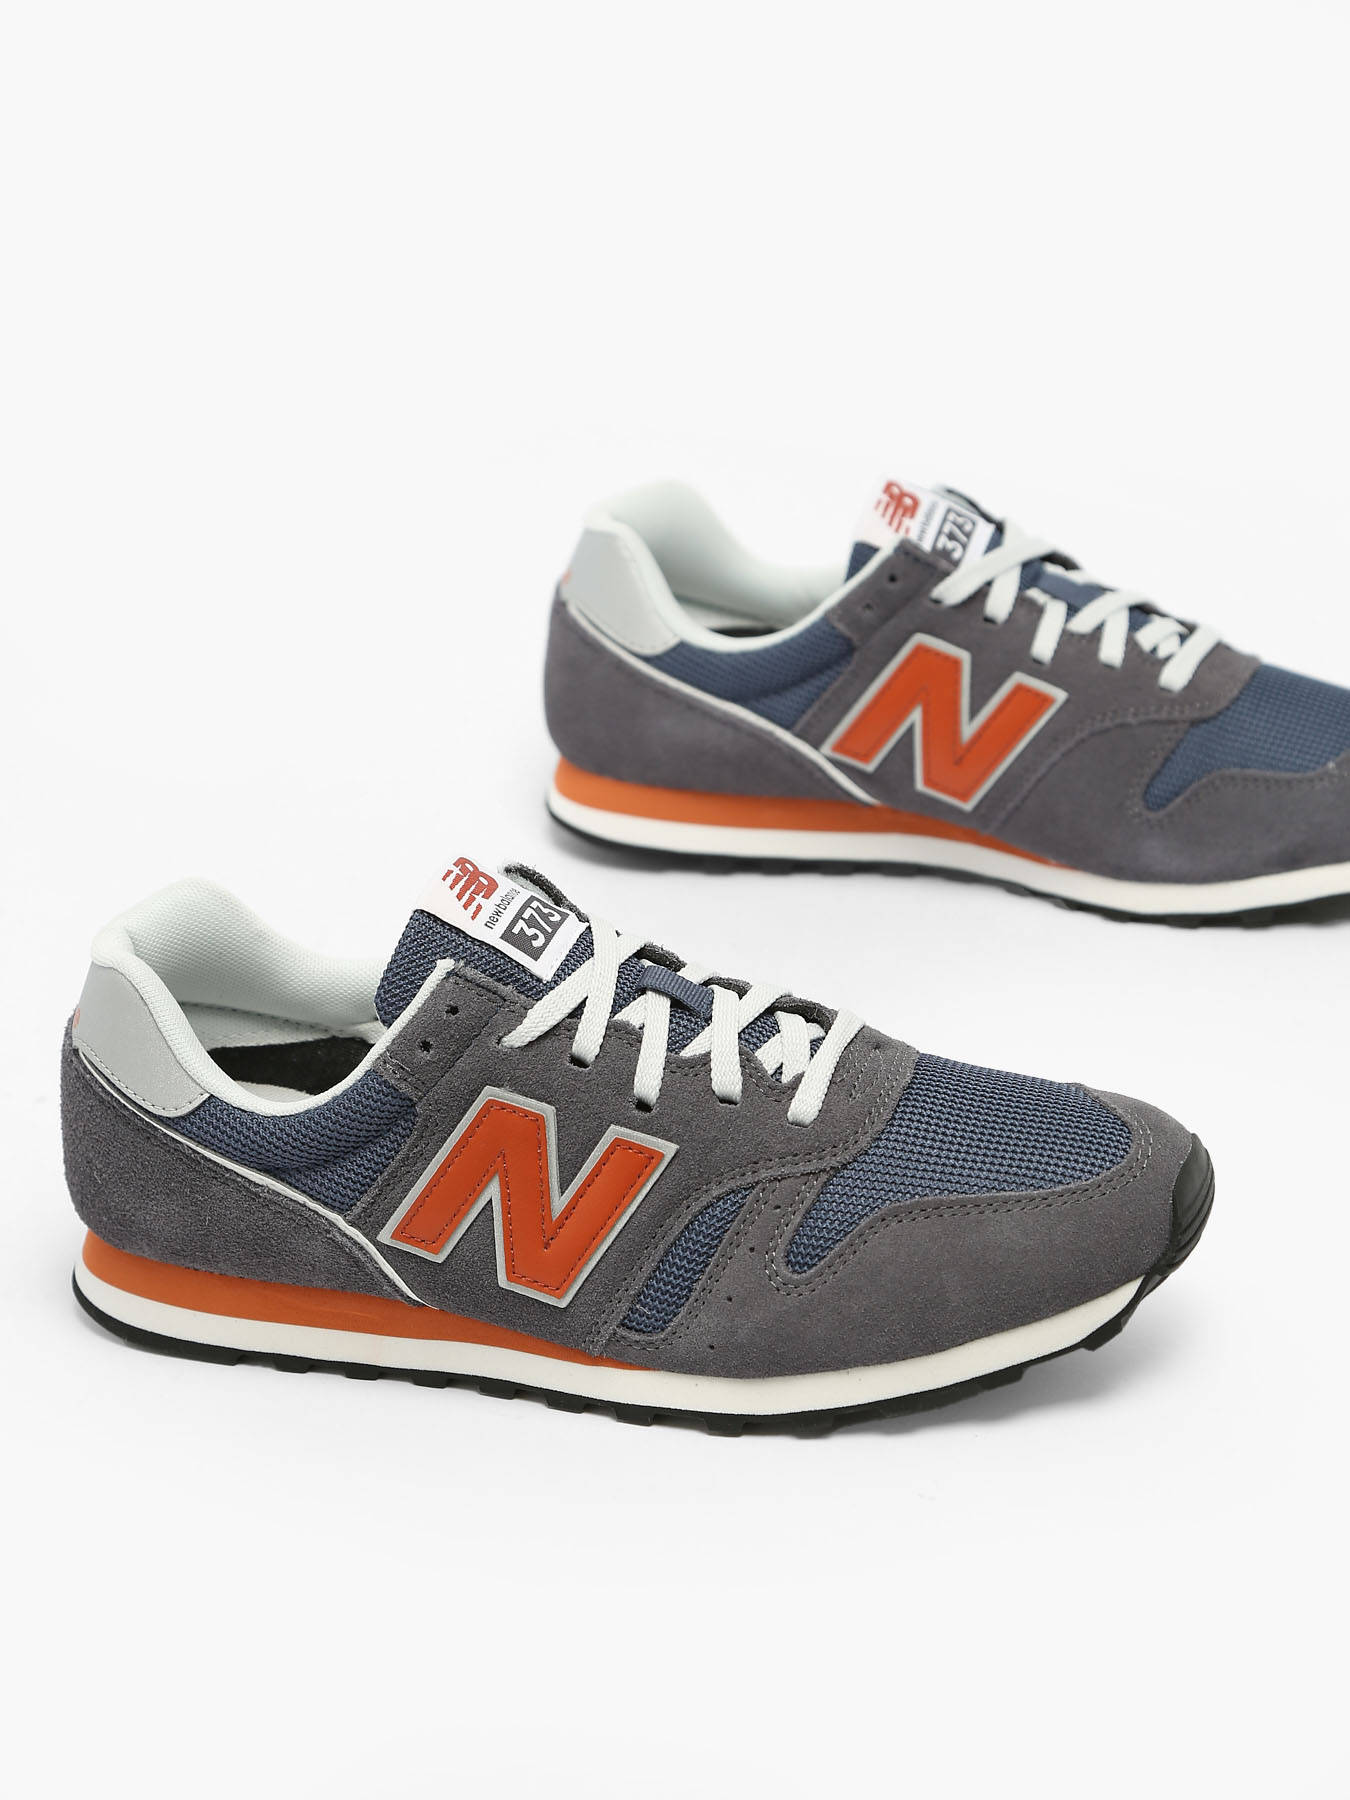 New Balance Sneakers ML373 - best prices